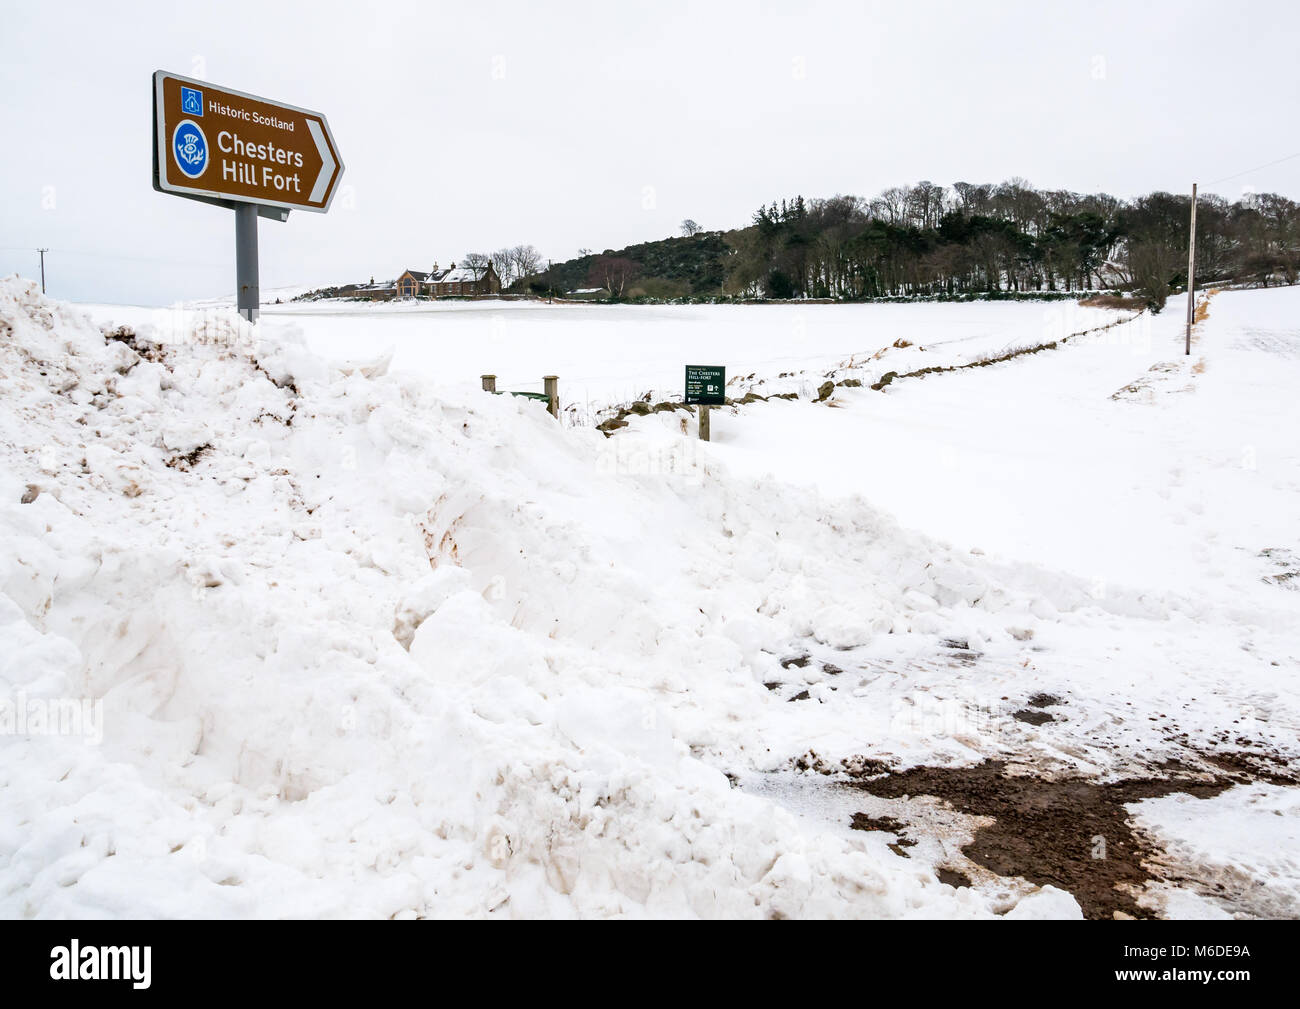 East Lothian, Scotland, United Kingdom, 3rd March 2018. UK Weather:  A local road is closed by huge snow drifts after the extreme arctic weather event nicknamed 'The Beast from the East'.  A Historic Scotland sign points the way to Chesters hill fort with the road covered in a snow drift Stock Photo